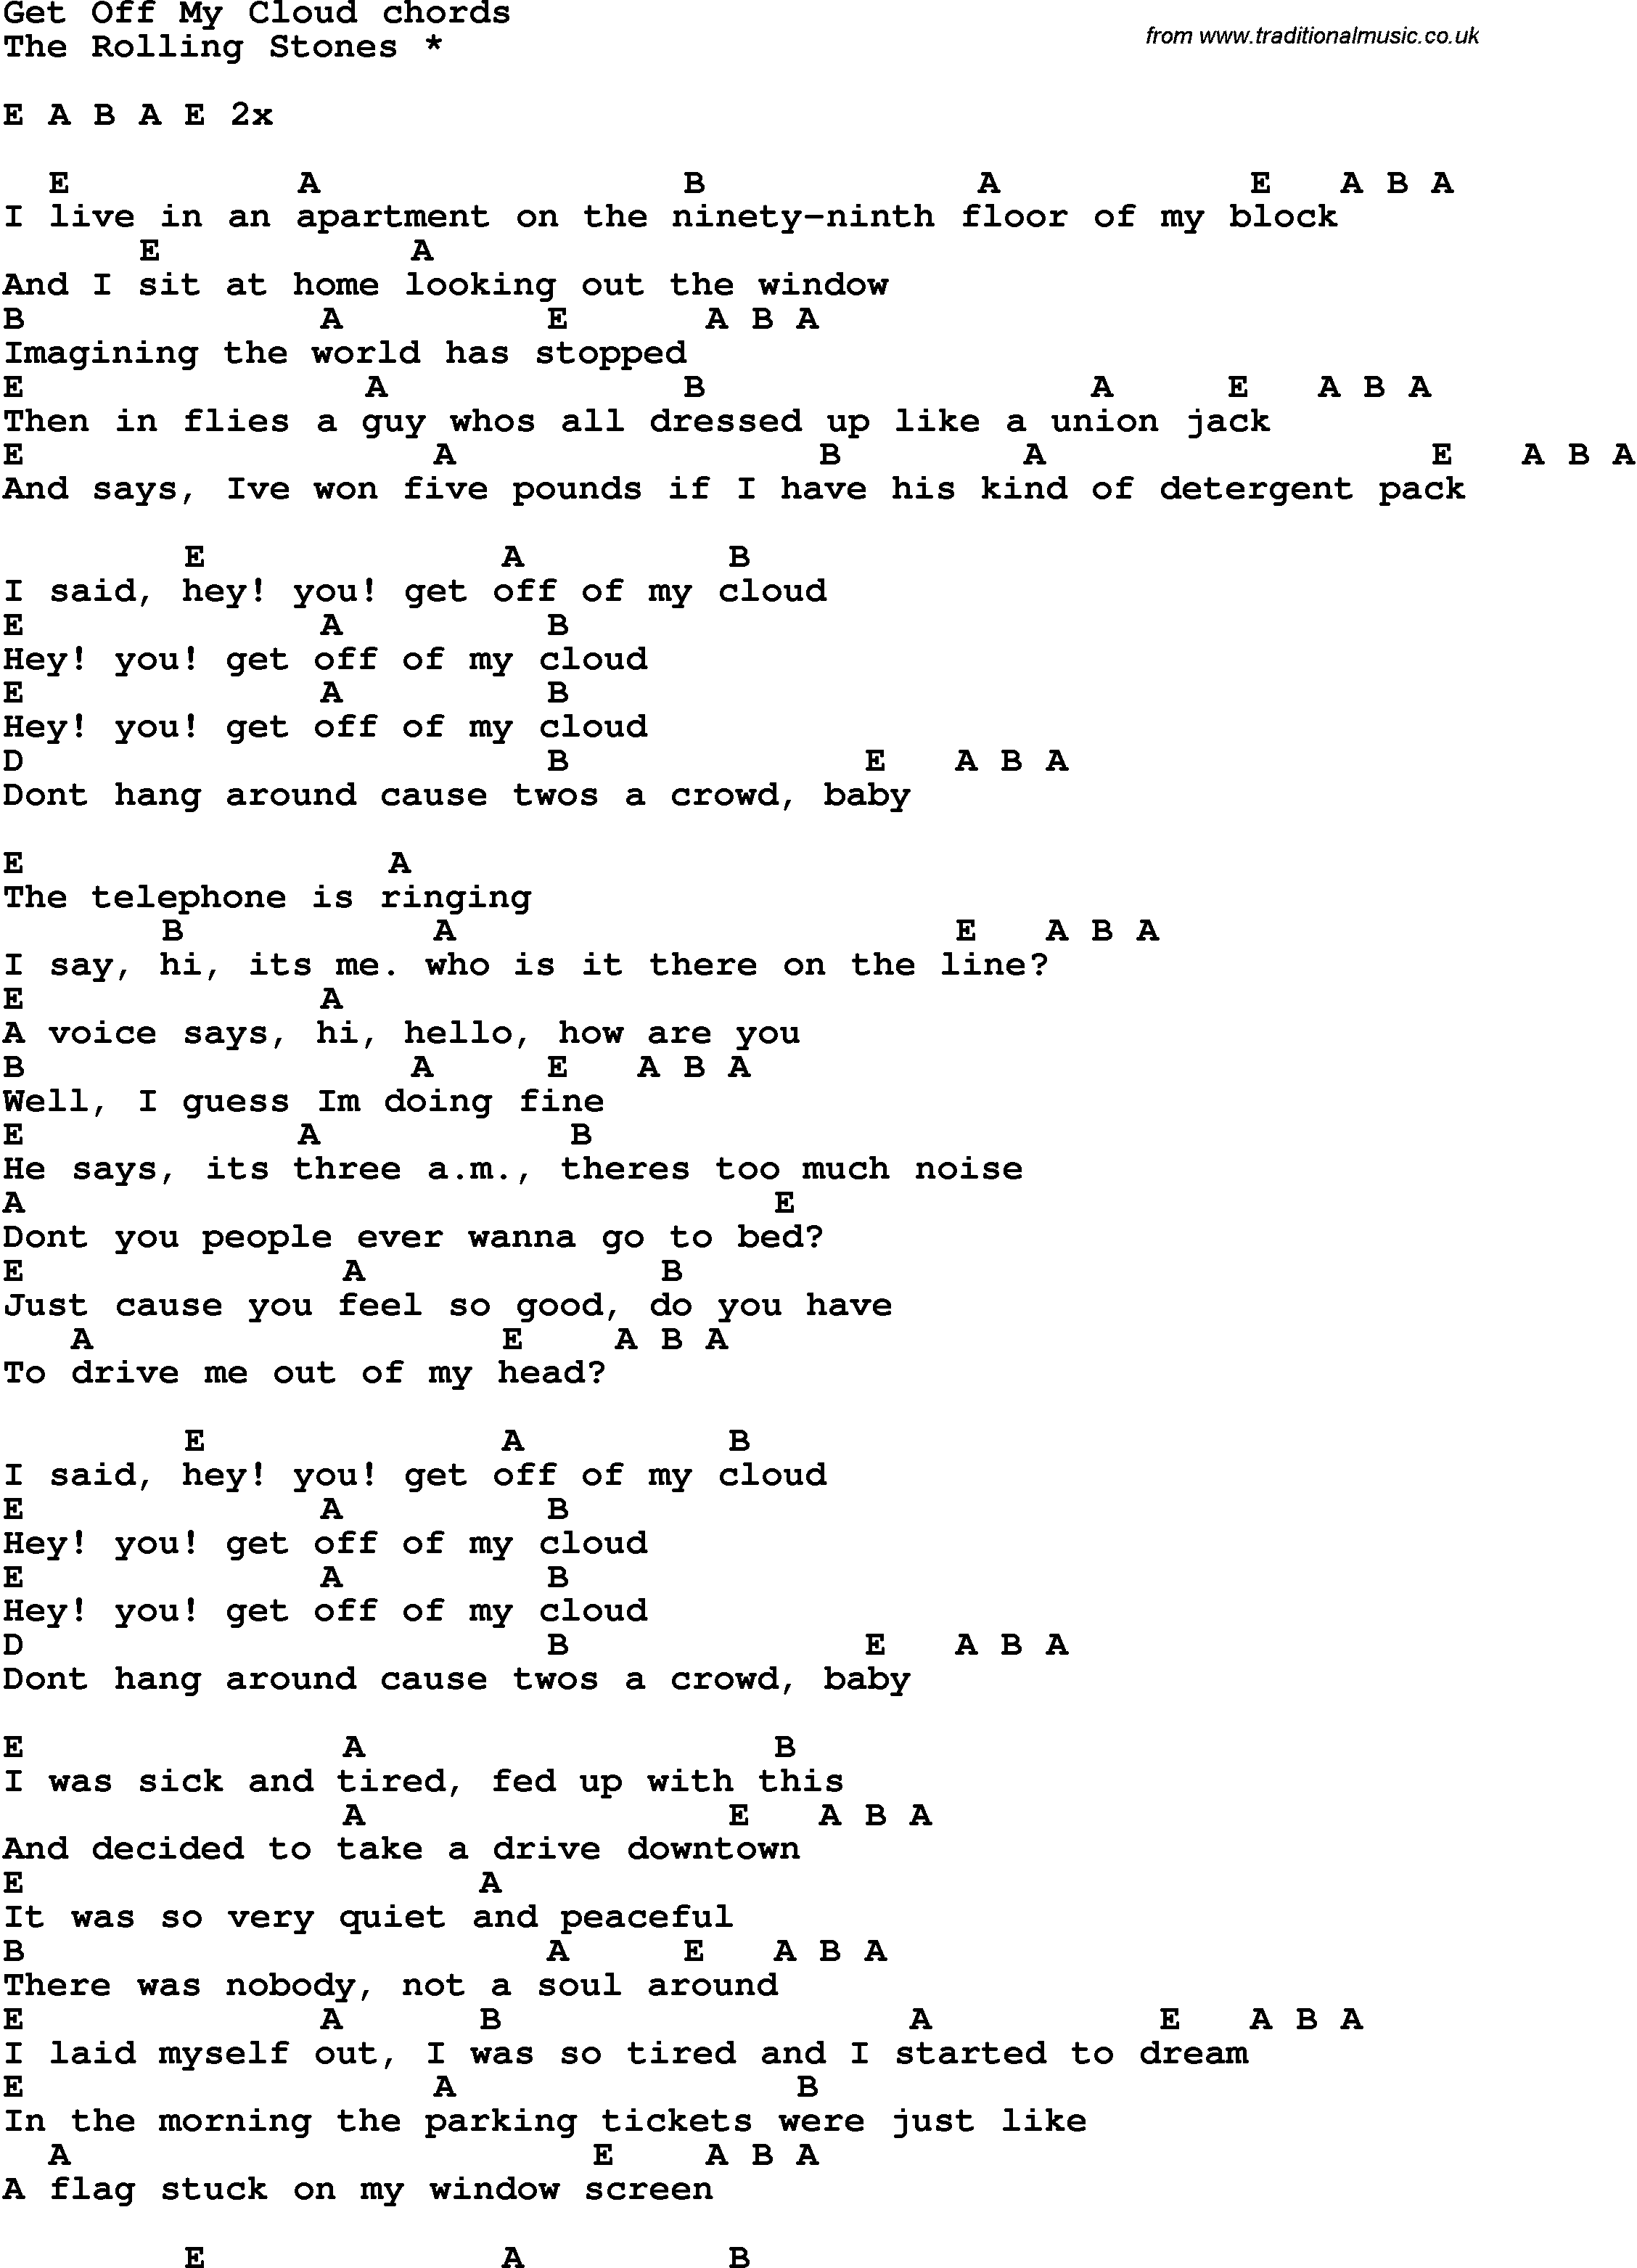 Song Lyrics with guitar chords for Get Off My Cloud